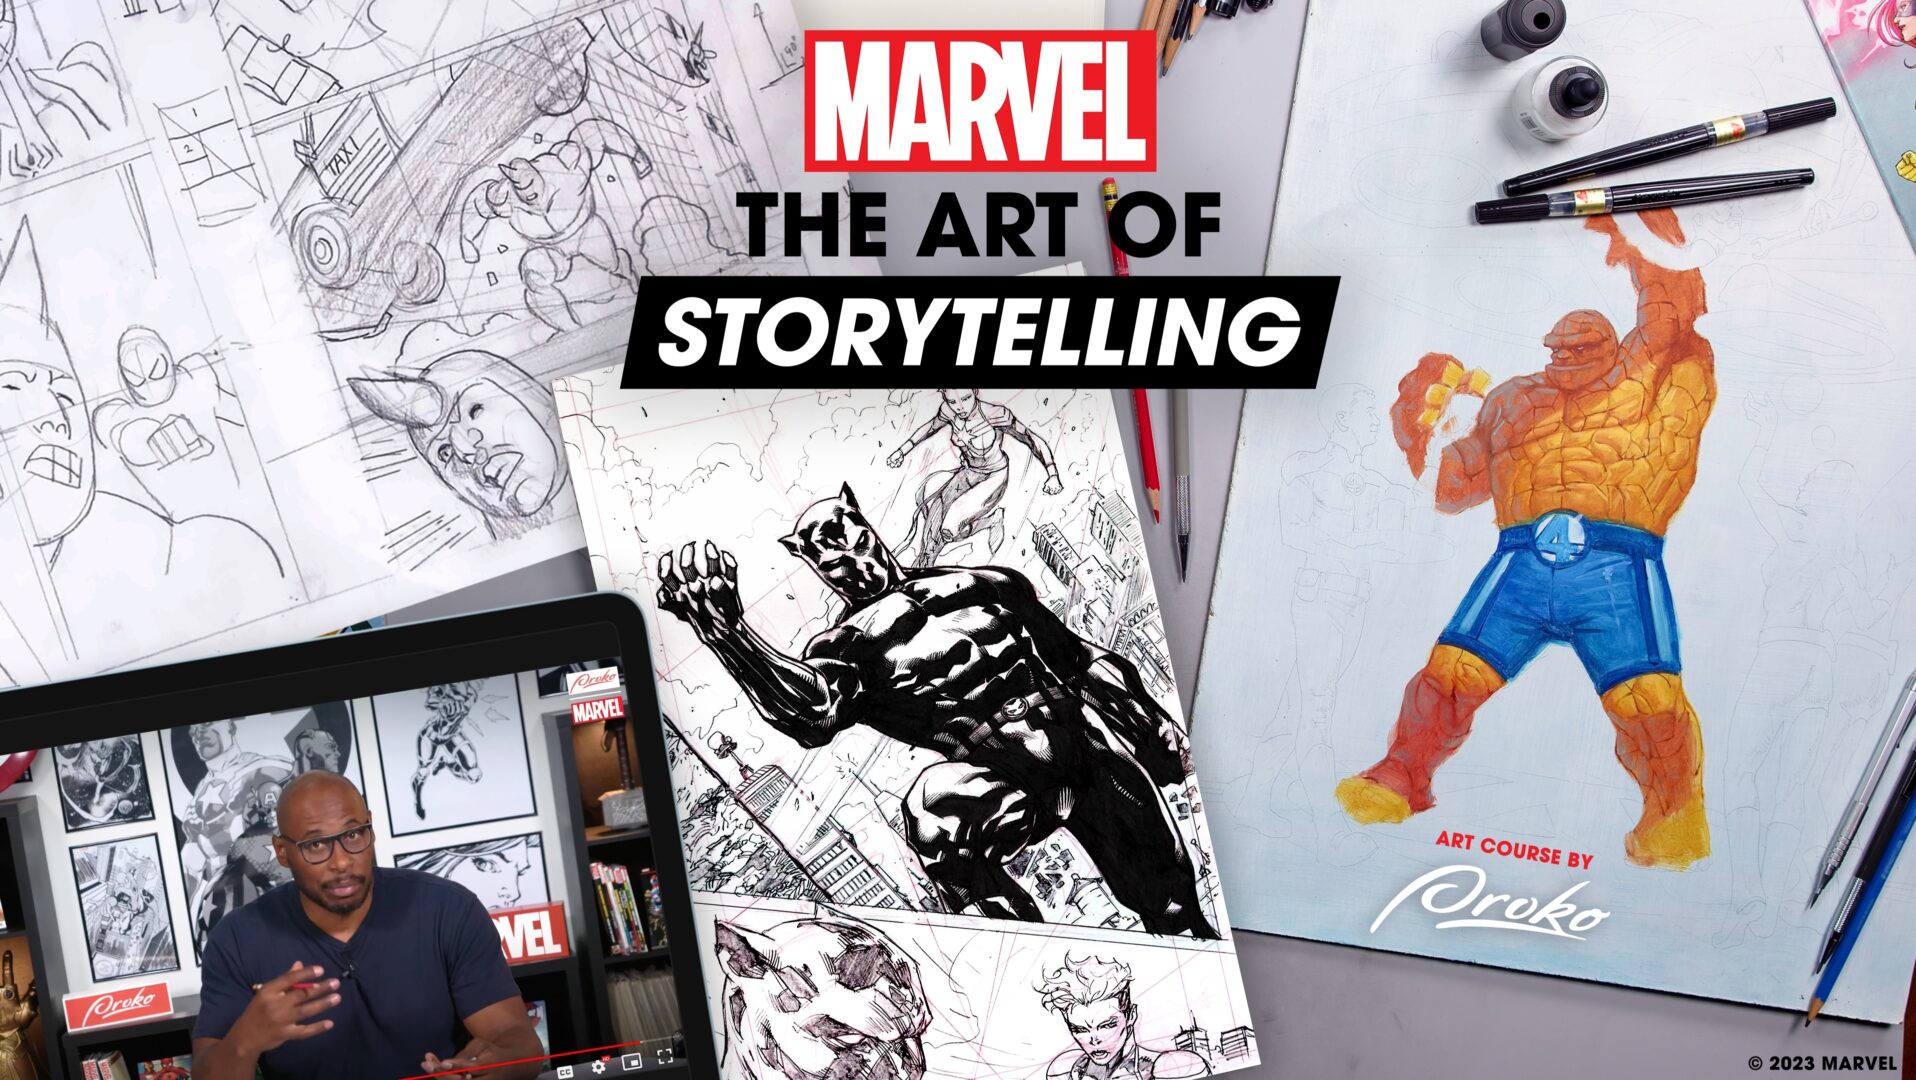 Proko Reveals New Course with “Marvels The Art of Storytelling” Launching July 12th